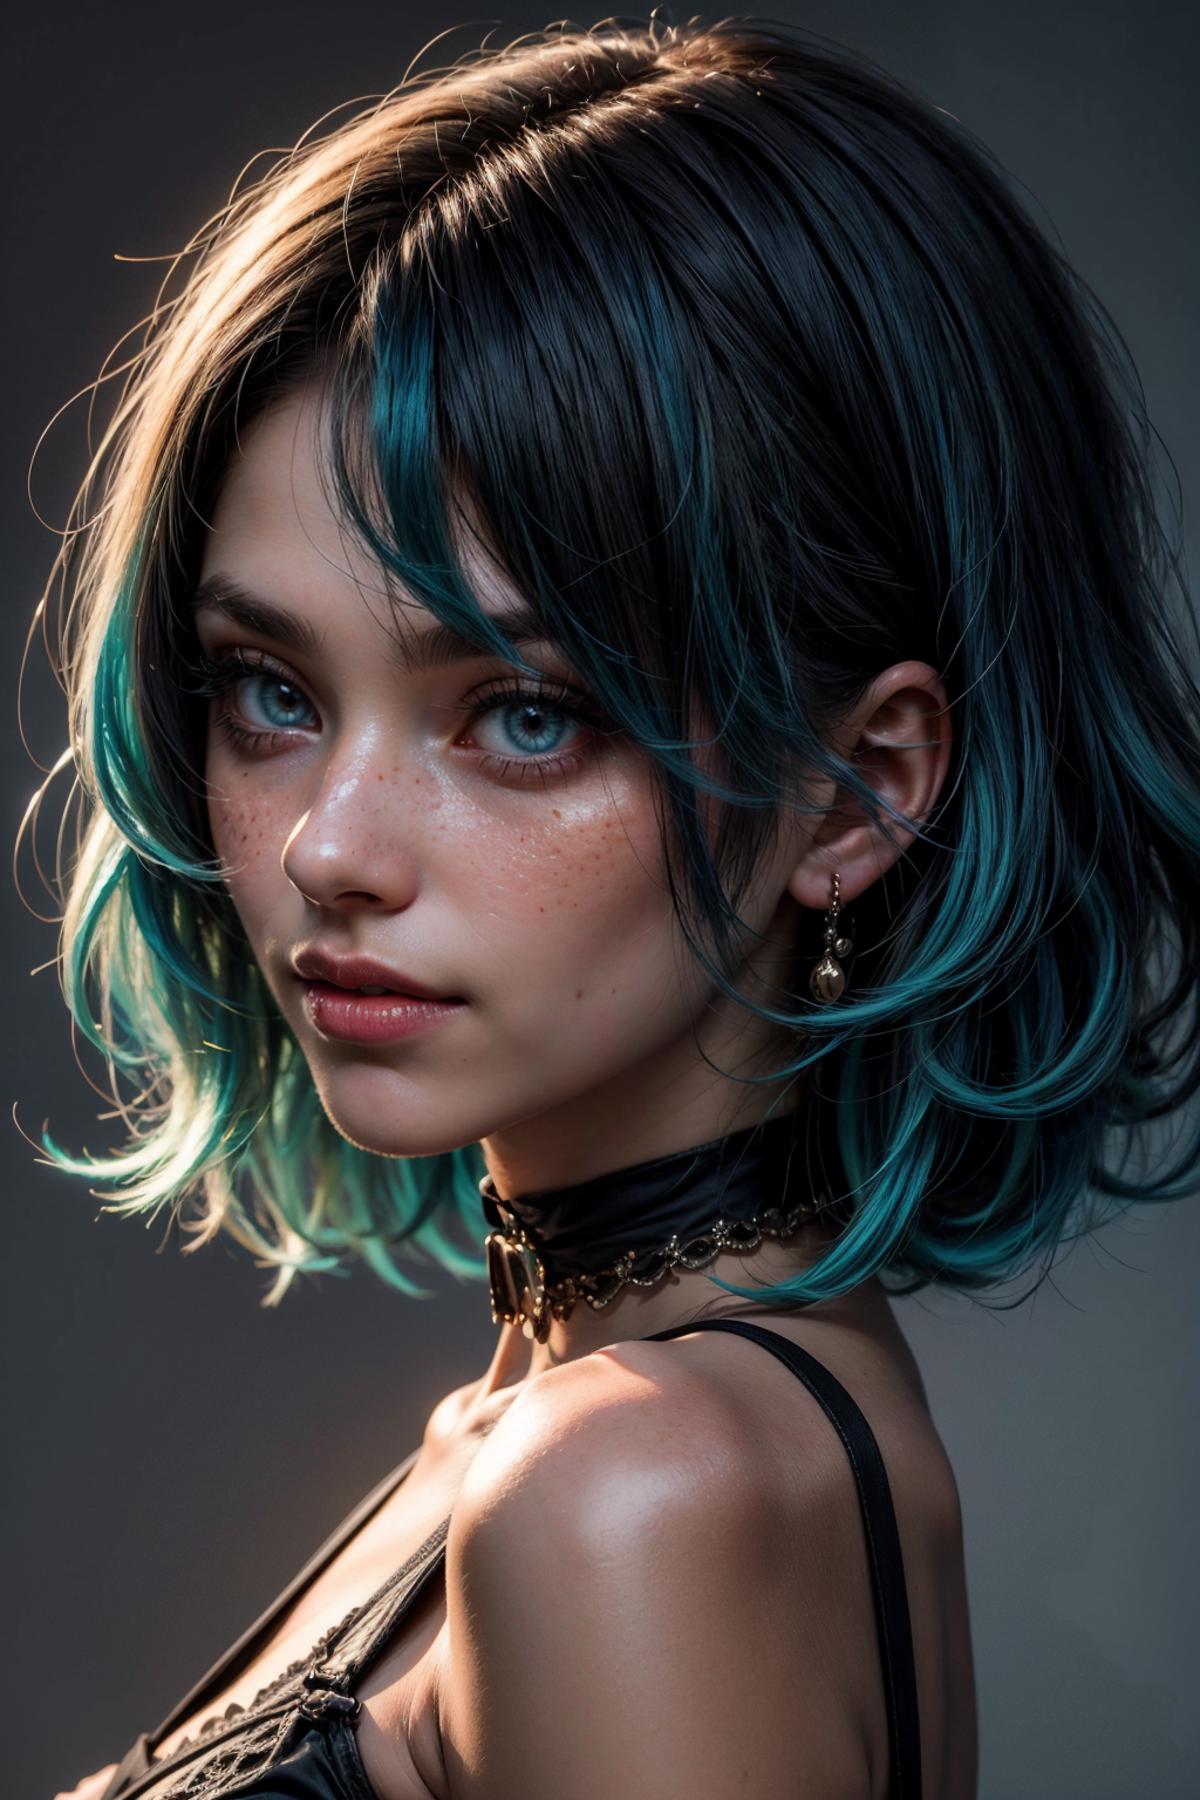 Dip Dyed Hair / Colored Tips | Concept LoRA image by popyay